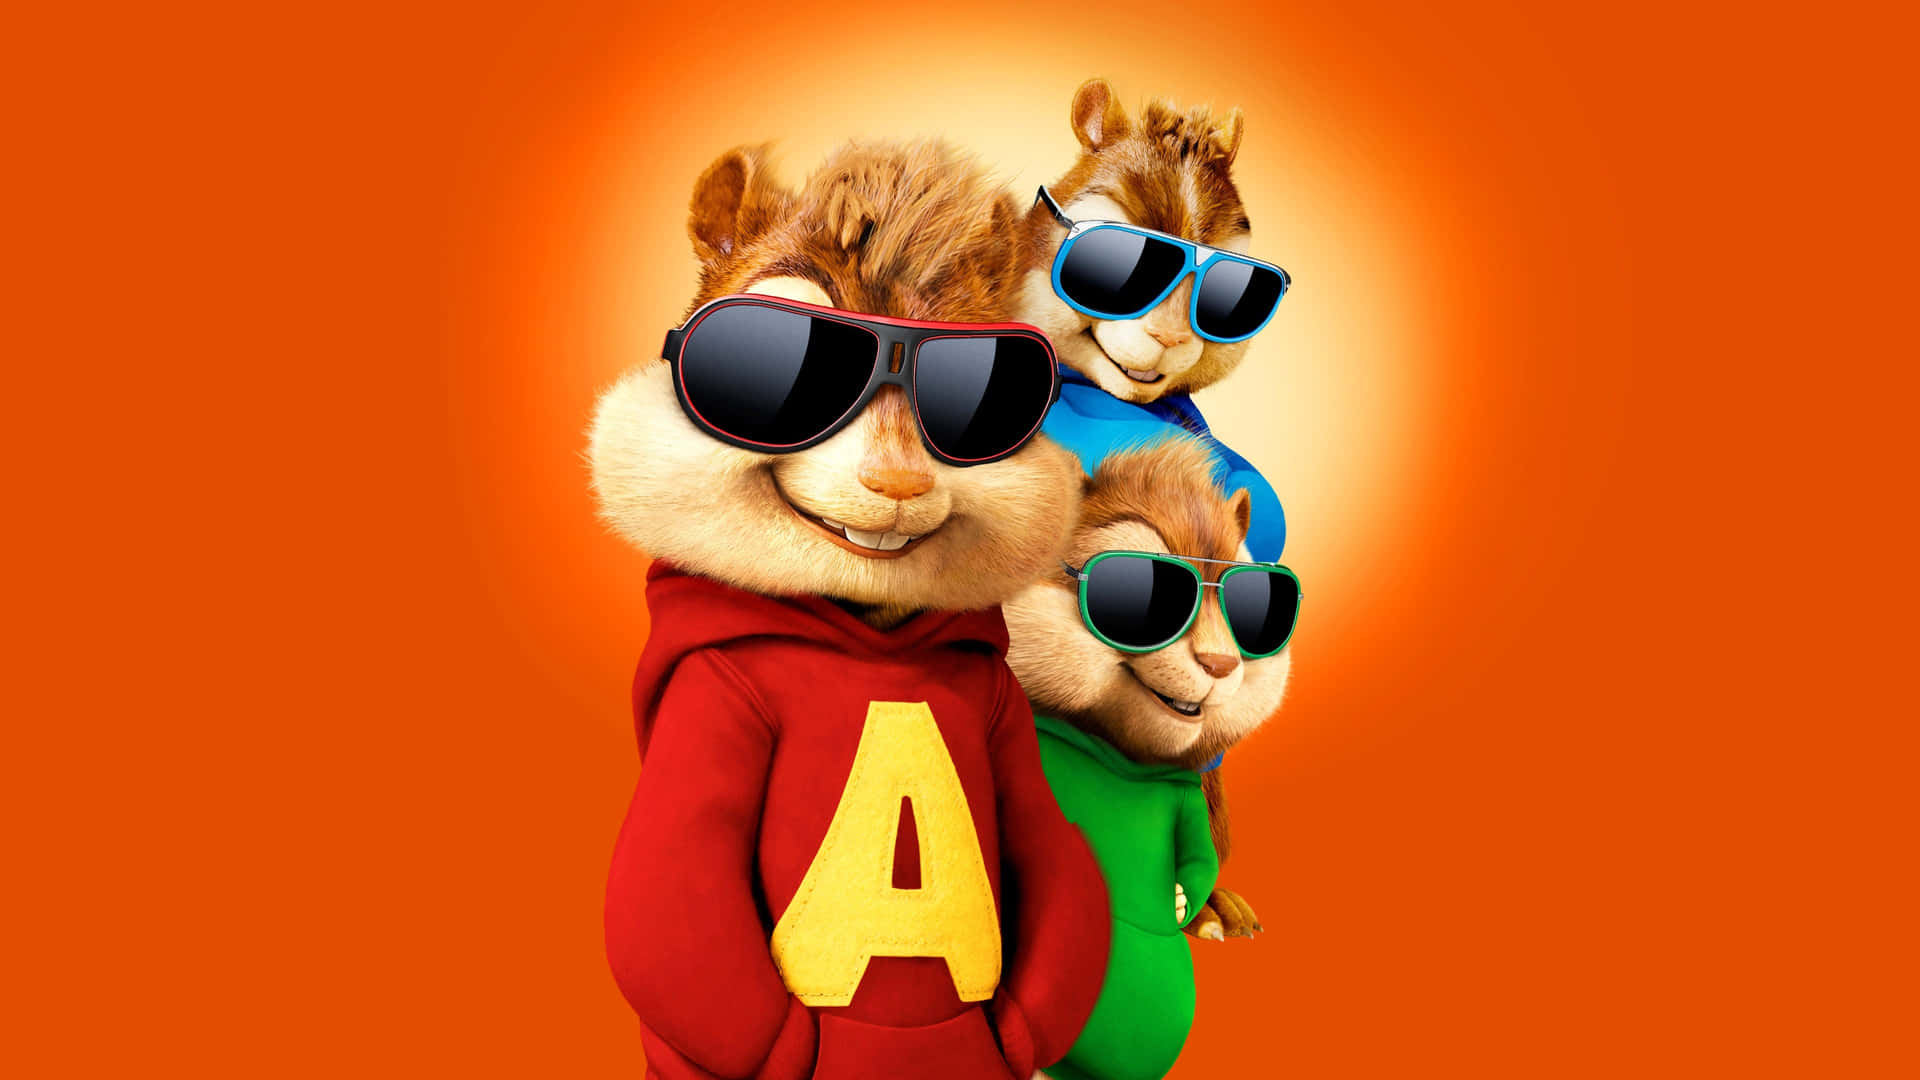 100+] Alvin And The Chipmunks Pictures